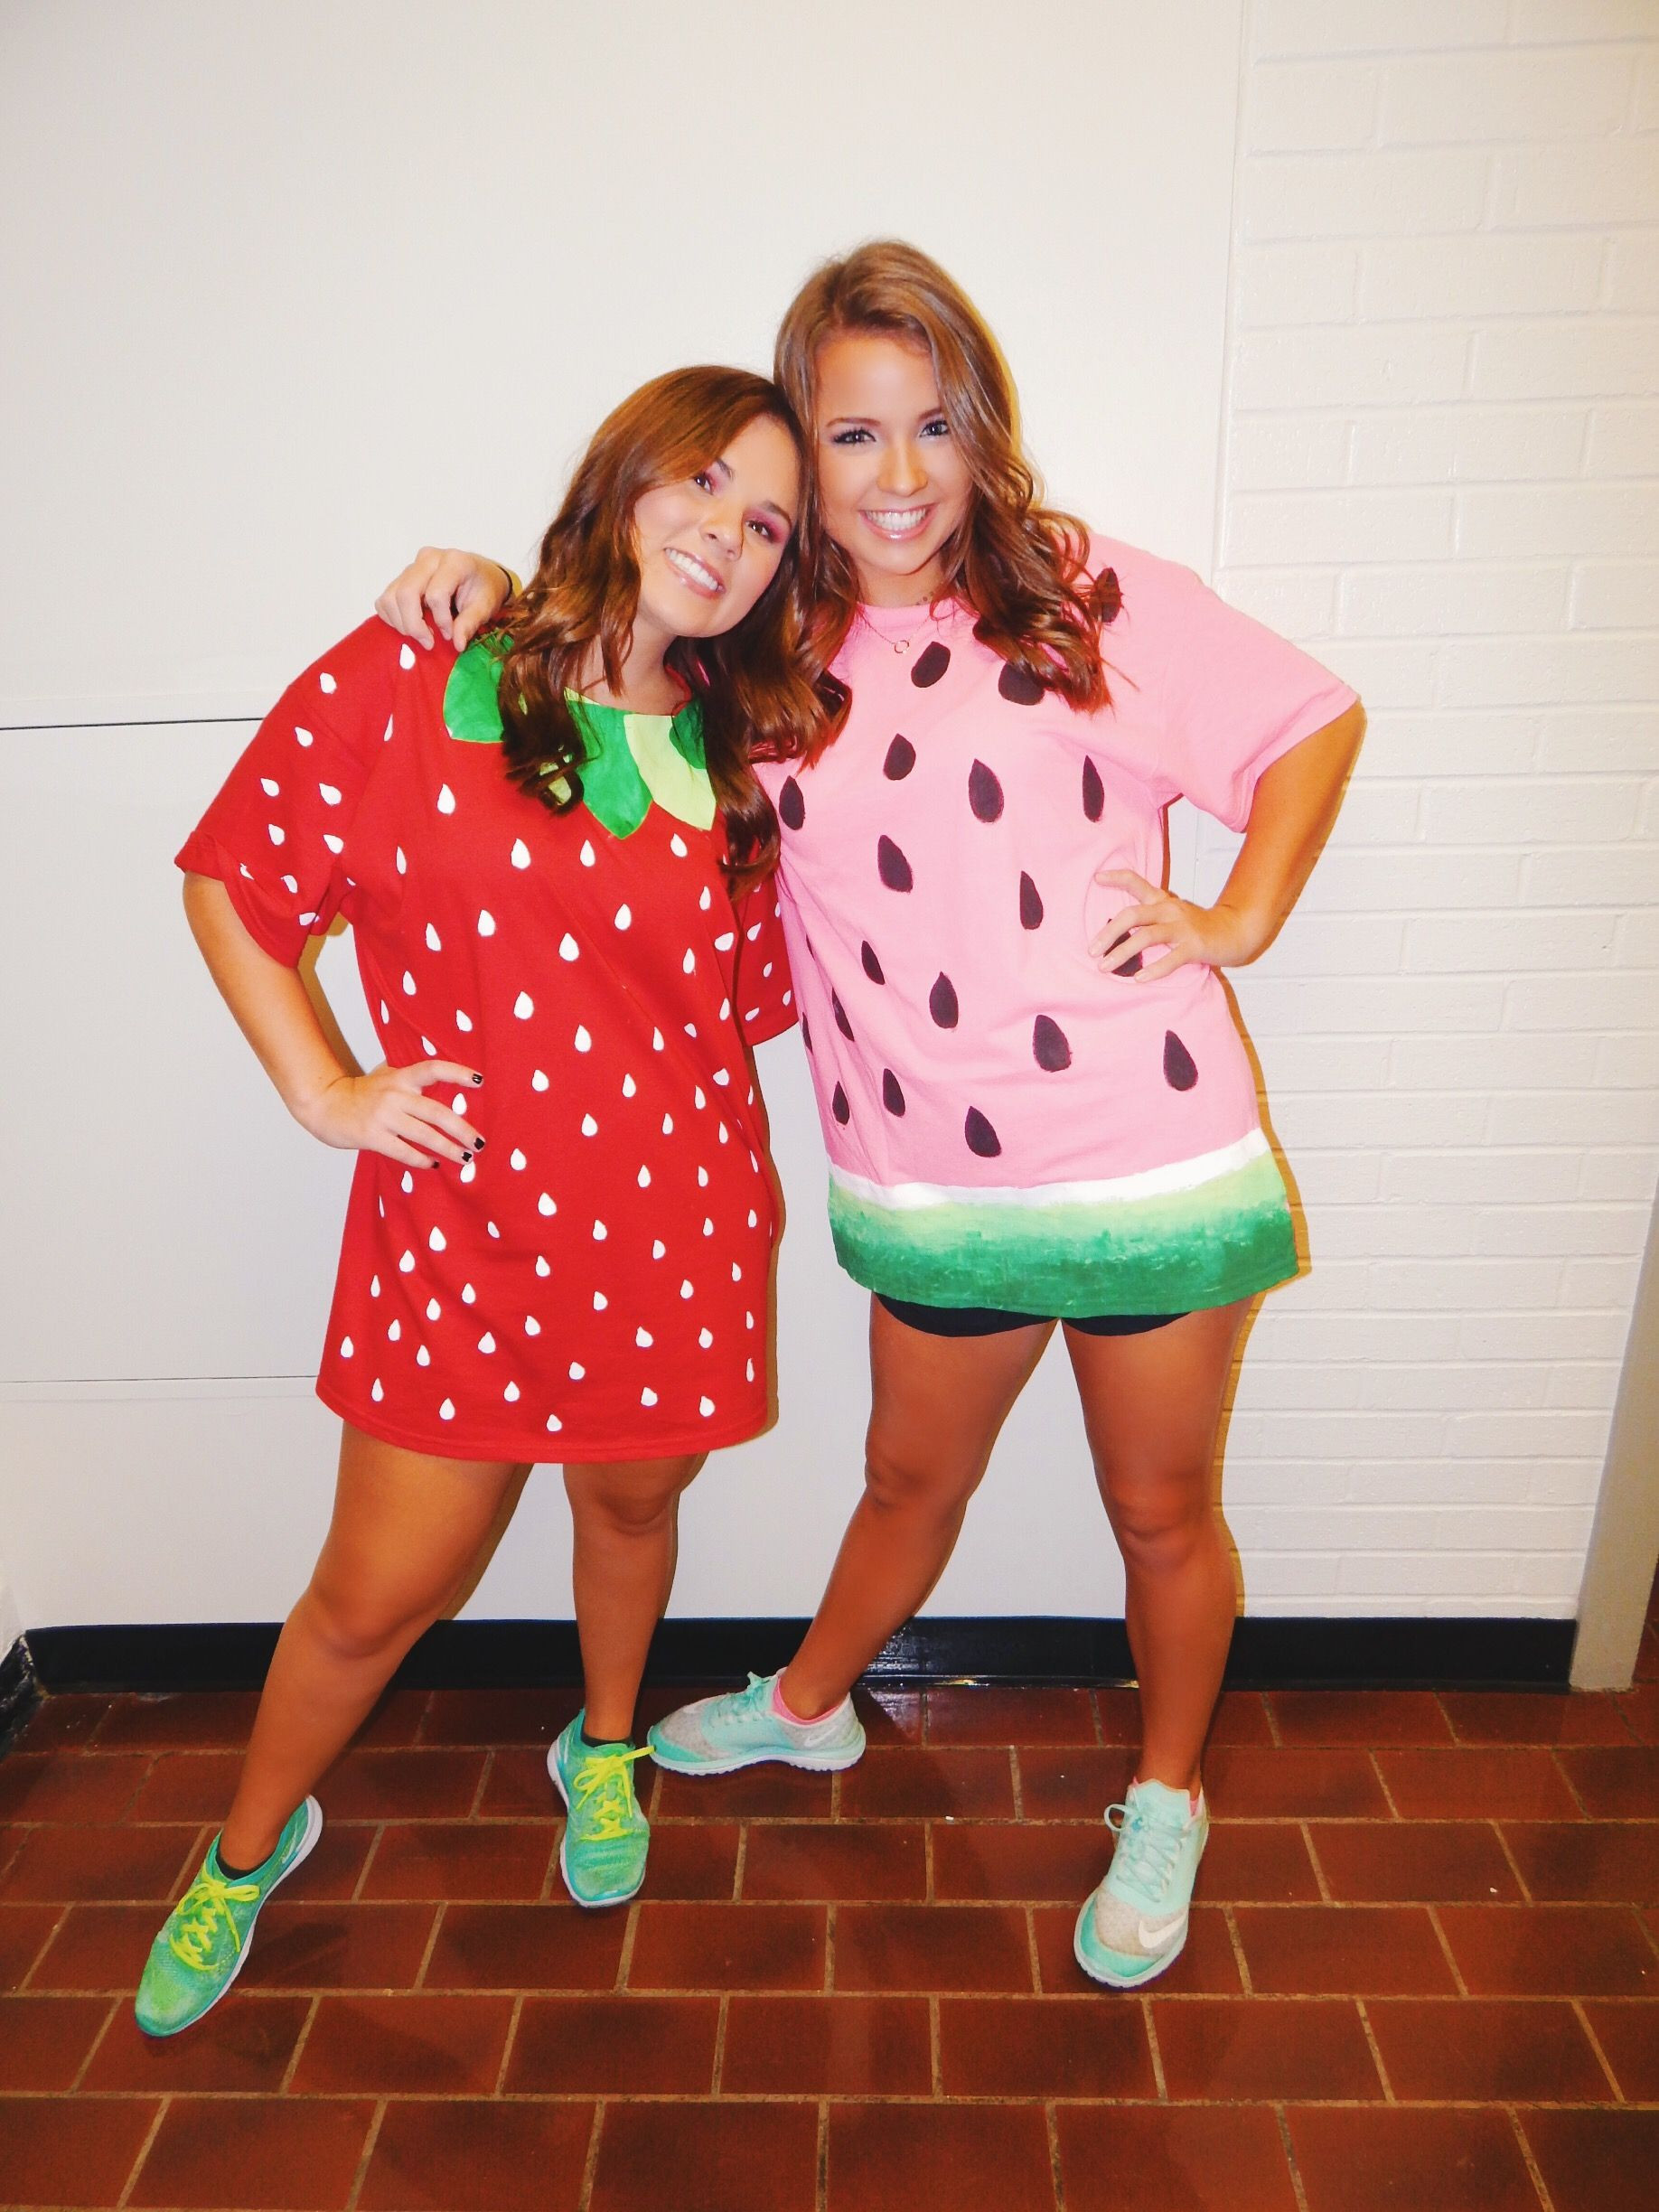 DIY Watermelon Costume
 DIY strawberry and watermelon halloween costumes in 2019